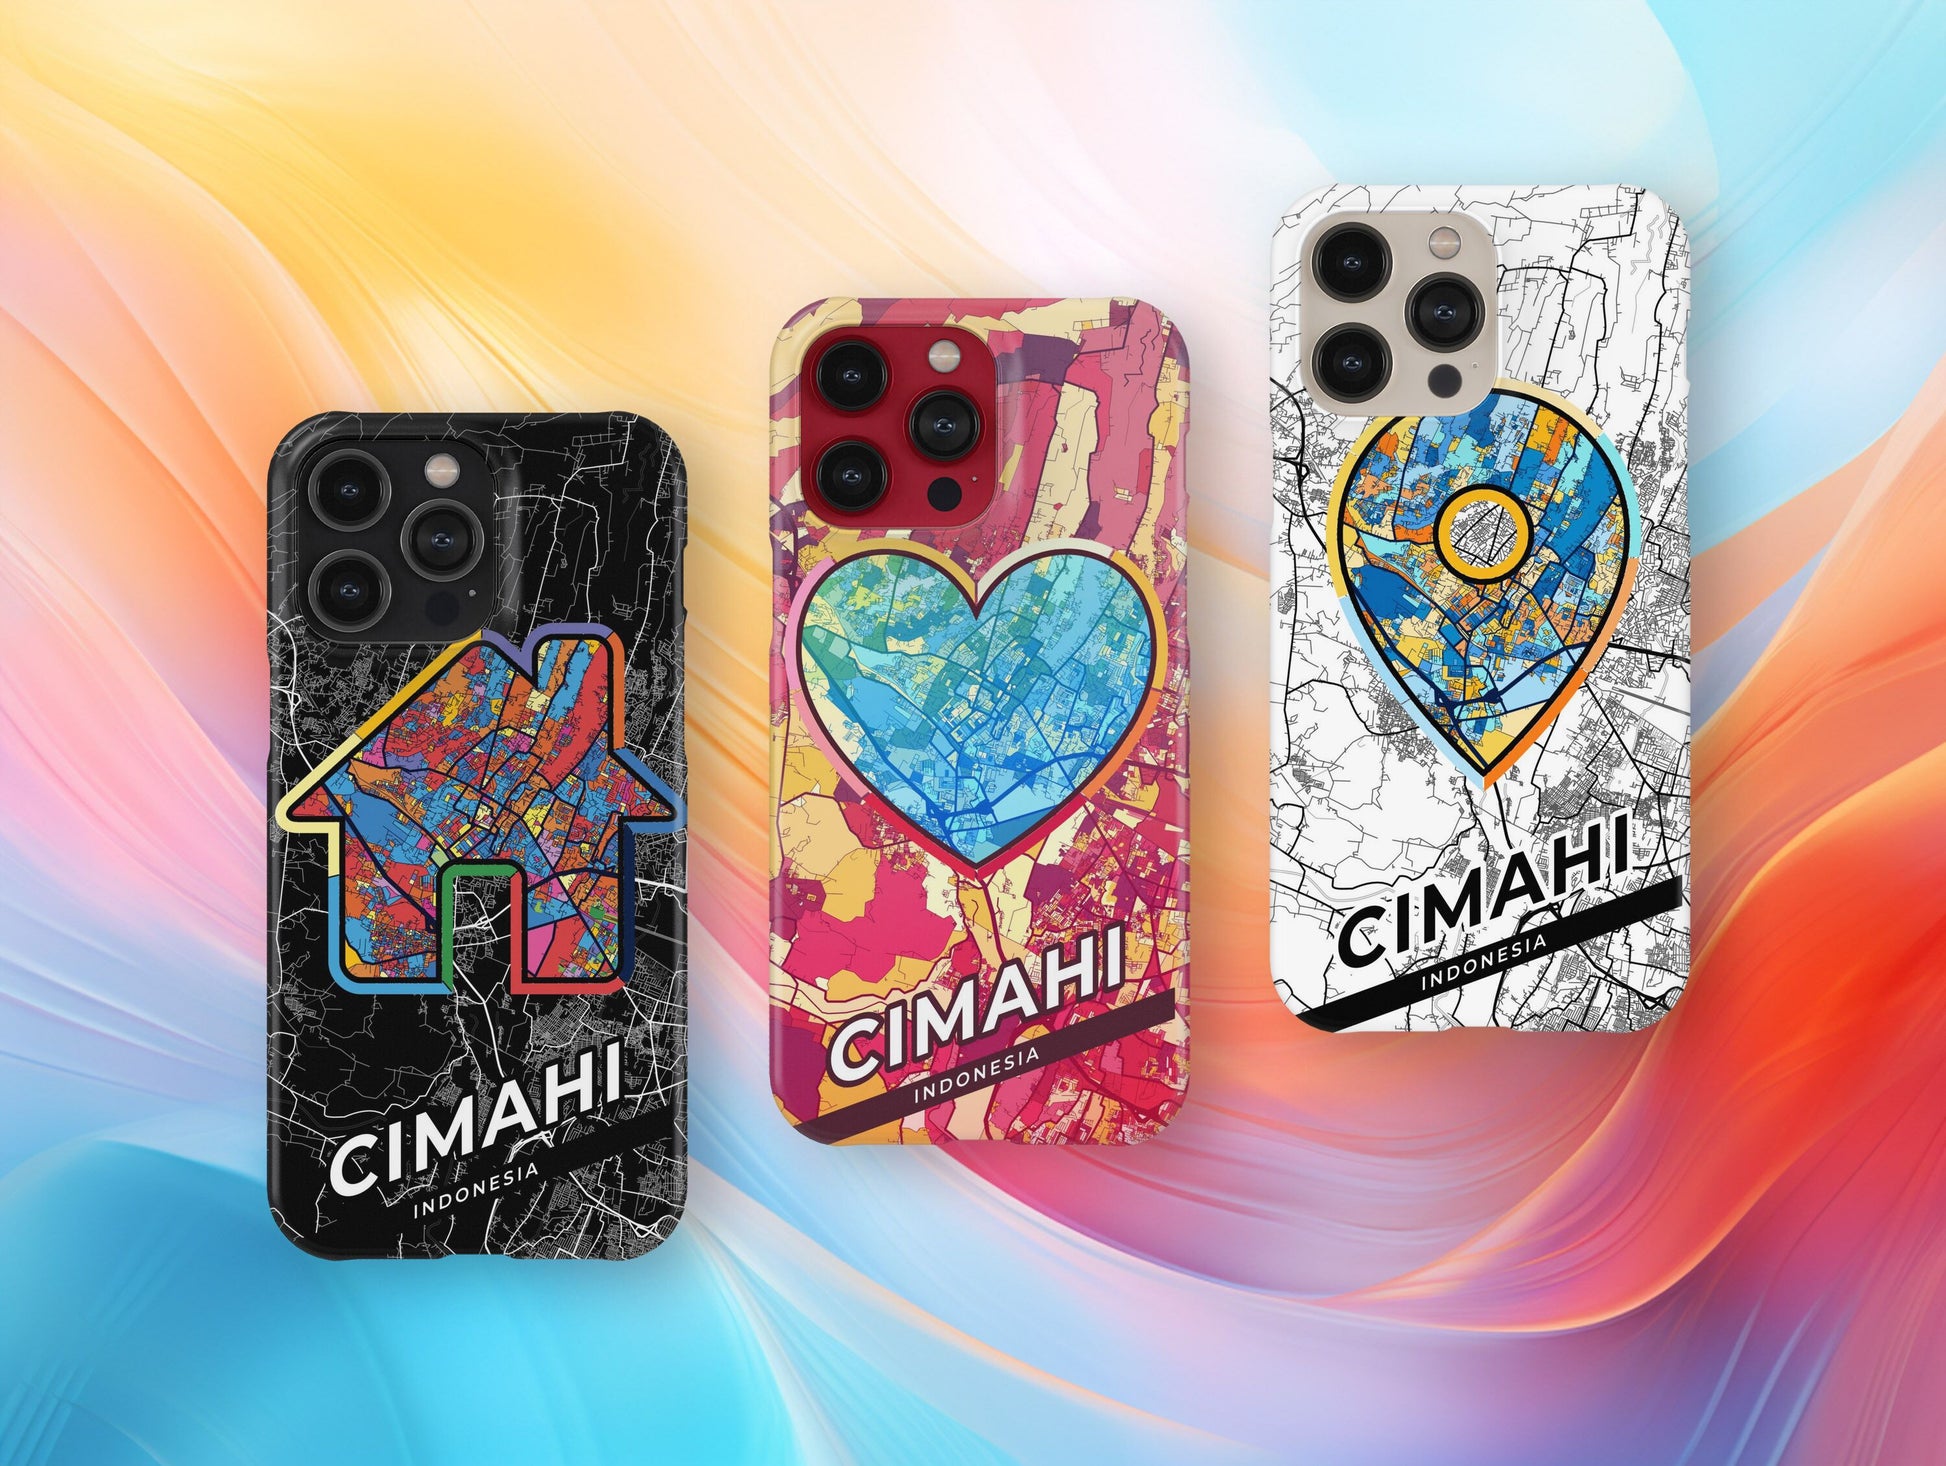 Cimahi Indonesia slim phone case with colorful icon. Birthday, wedding or housewarming gift. Couple match cases.